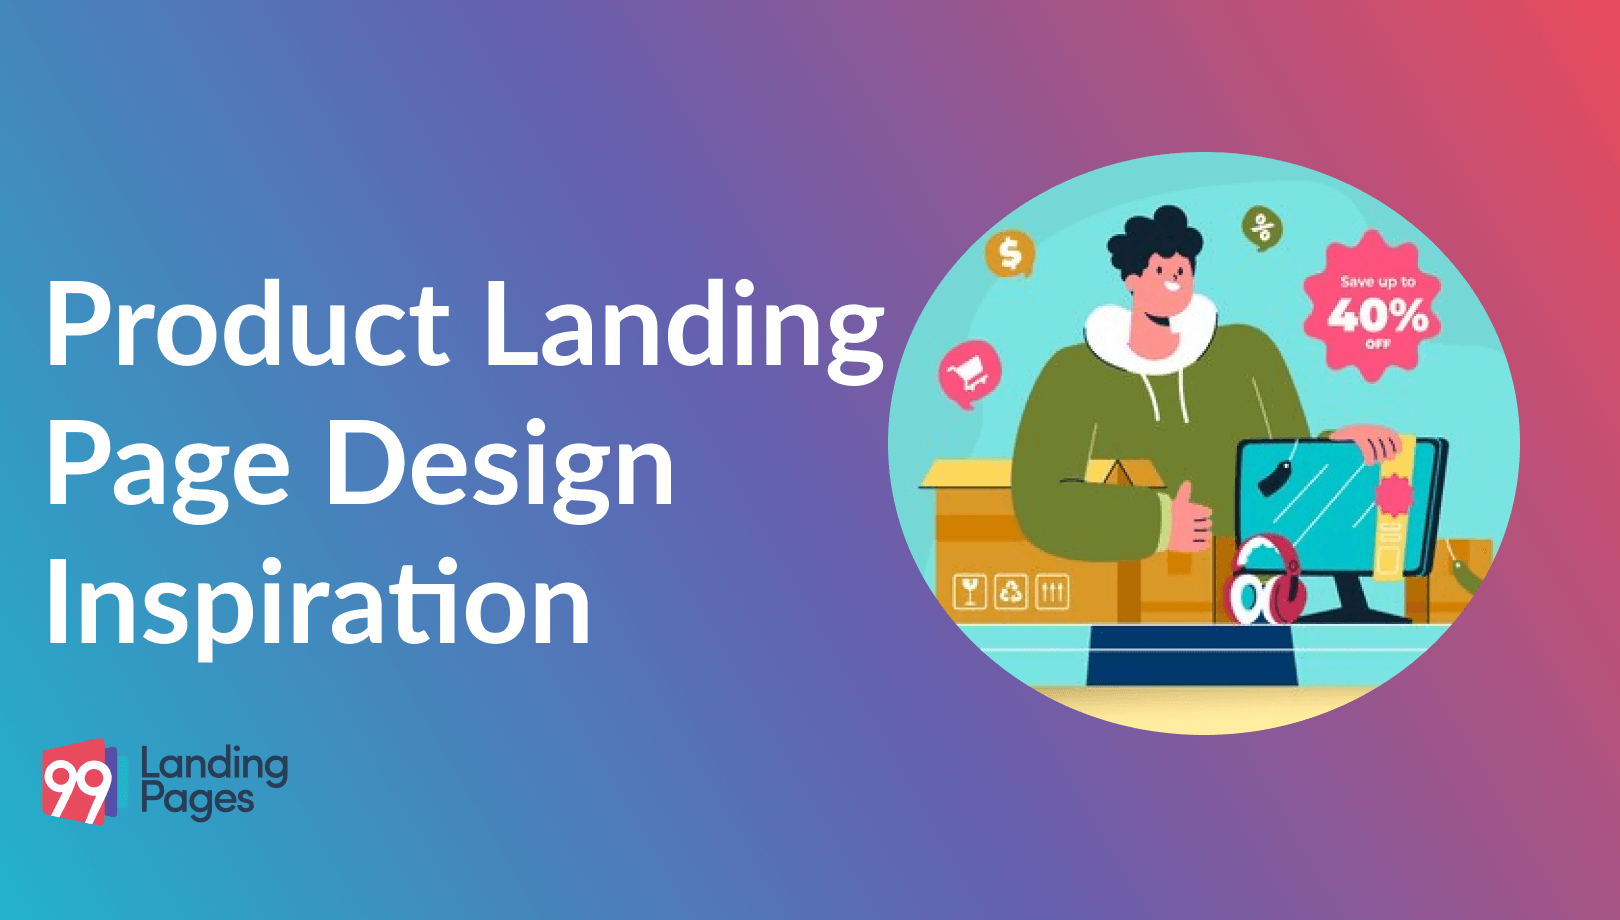 Product Landing Page Design Inspiration 